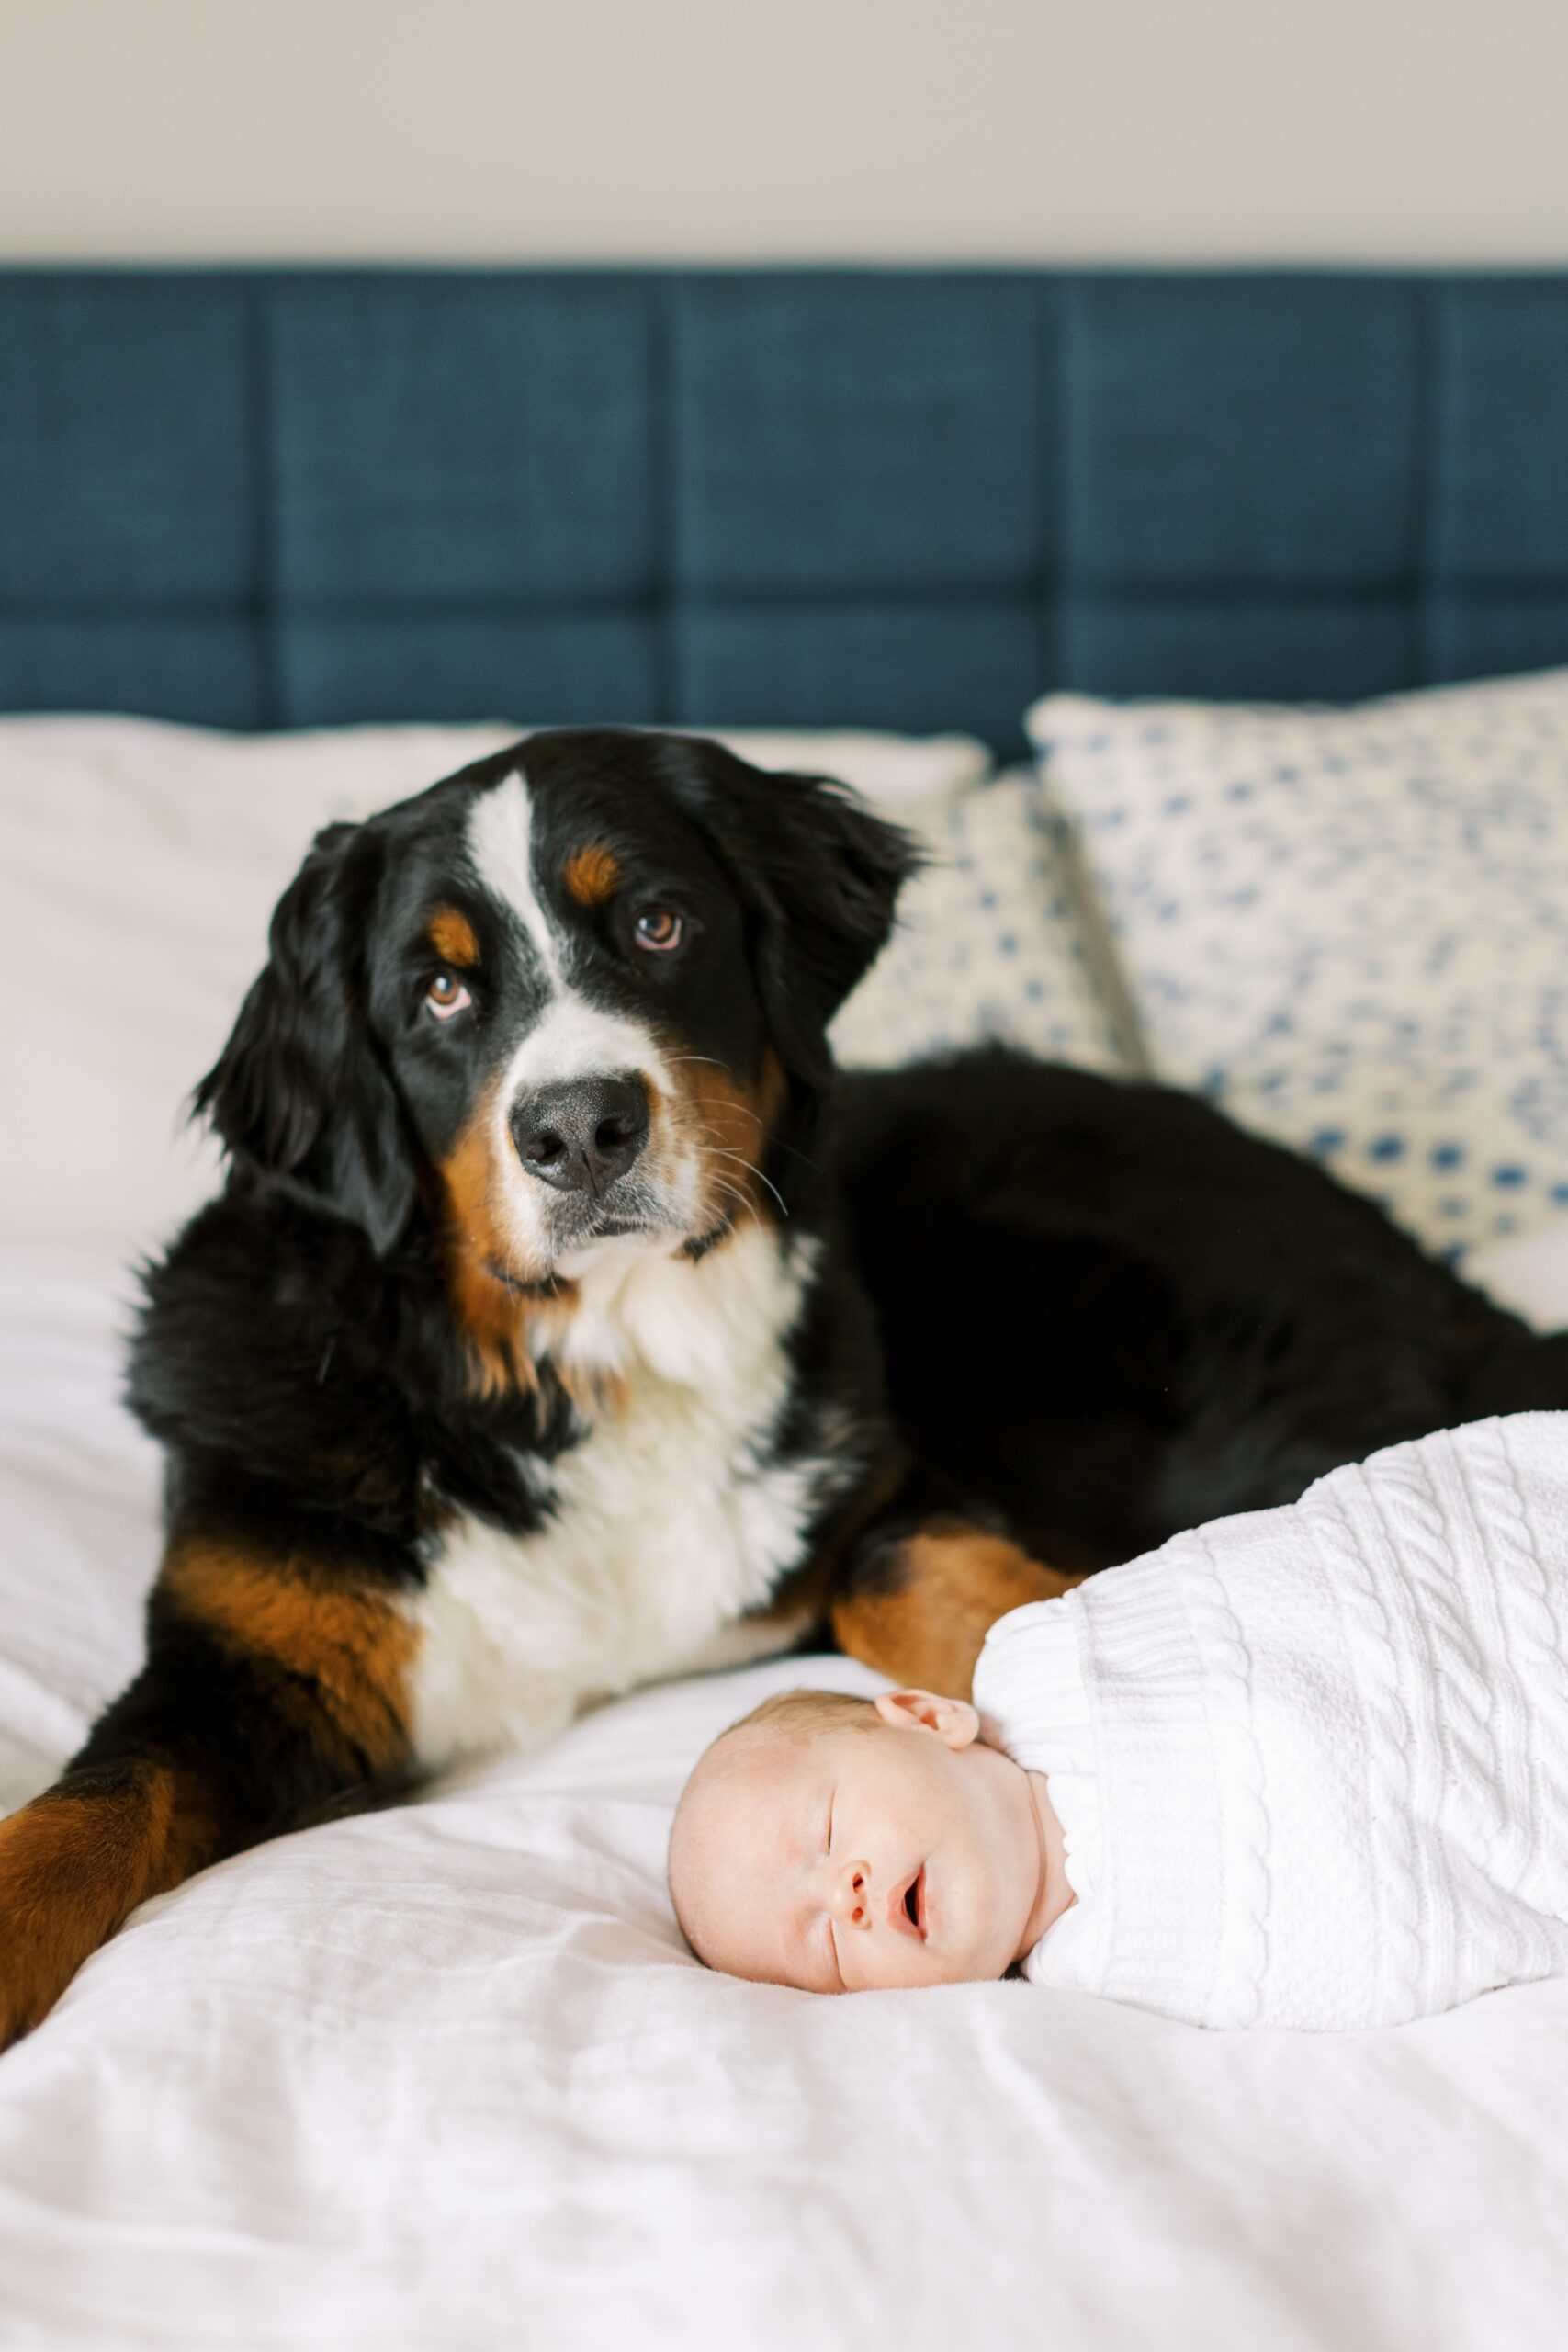 the family dog laid on the bed with the newborn during the family photoshoot